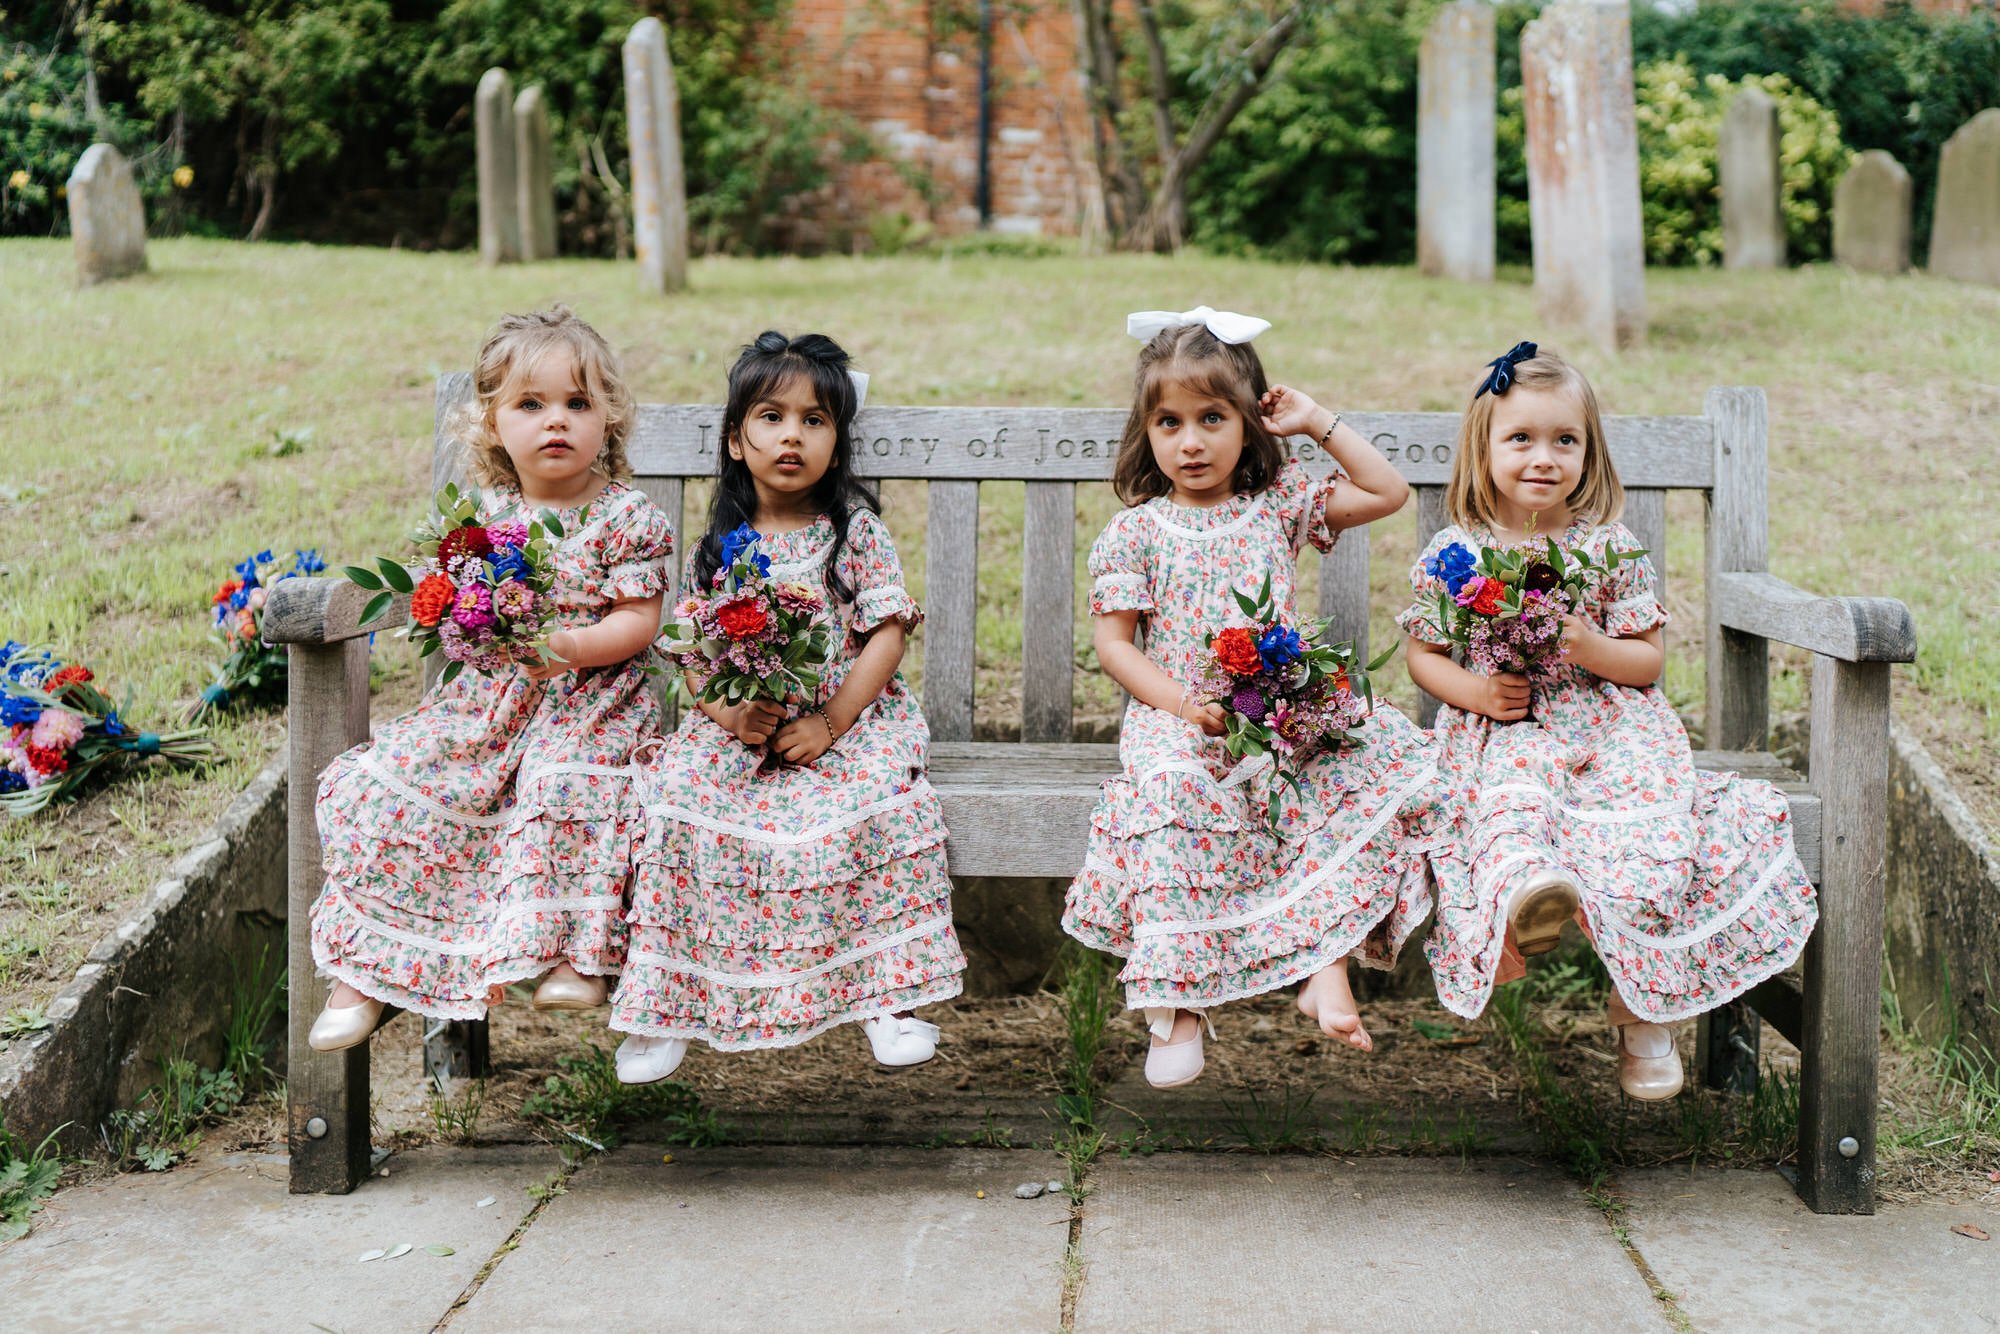 Four little bridesmaids in colourful dresses hold their flowers and pose for the camera